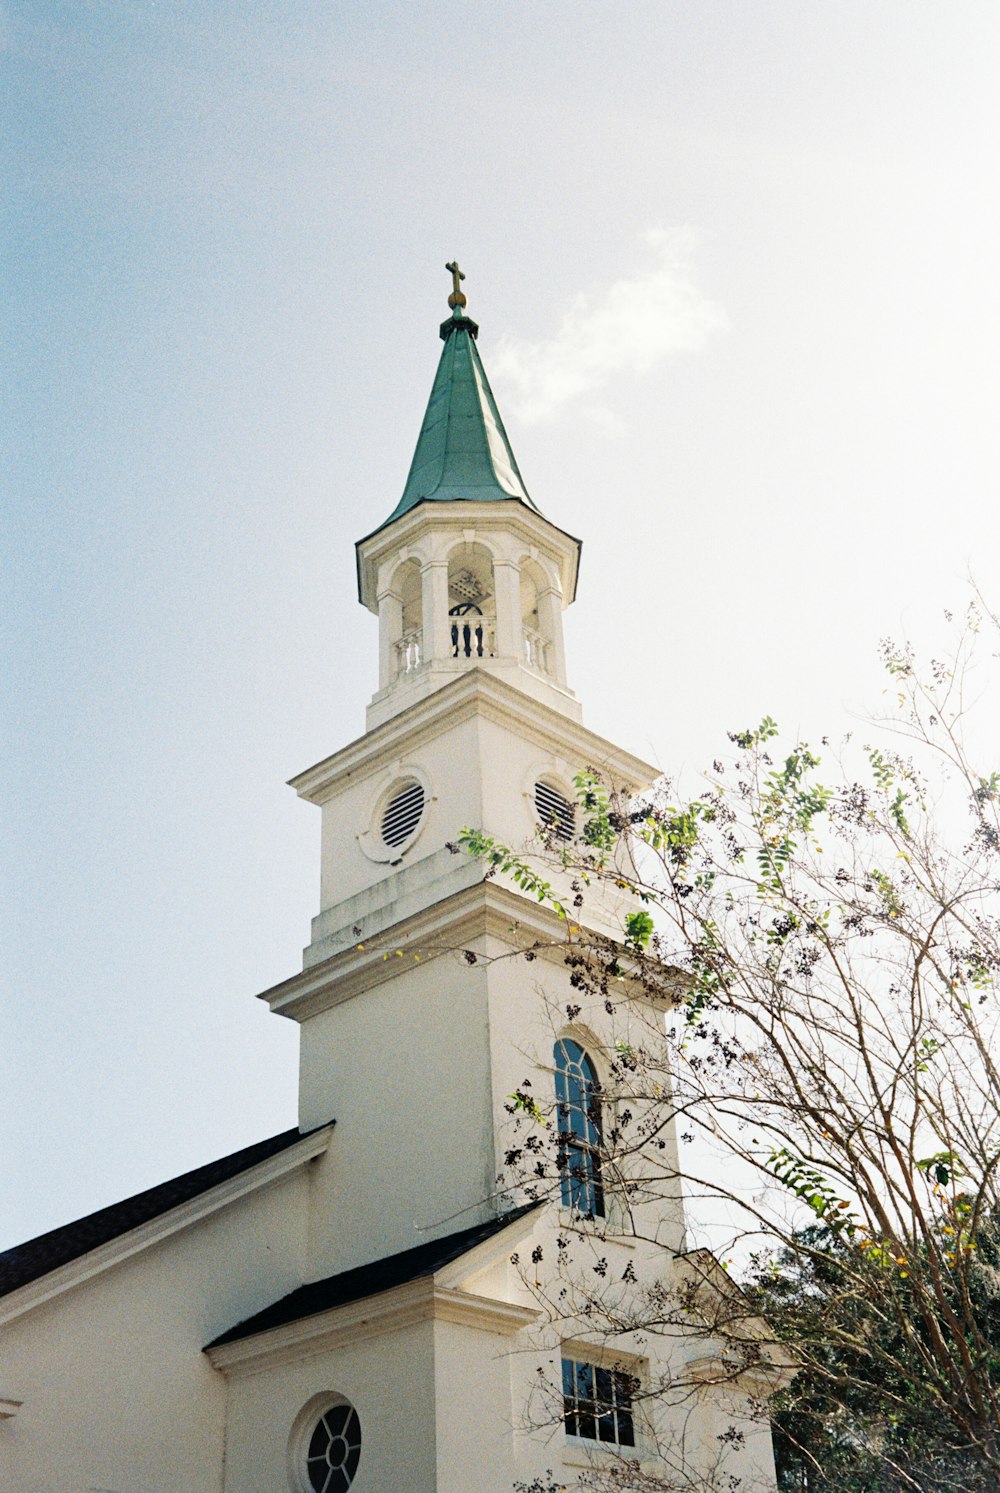 a white church with a green steeple and a clock